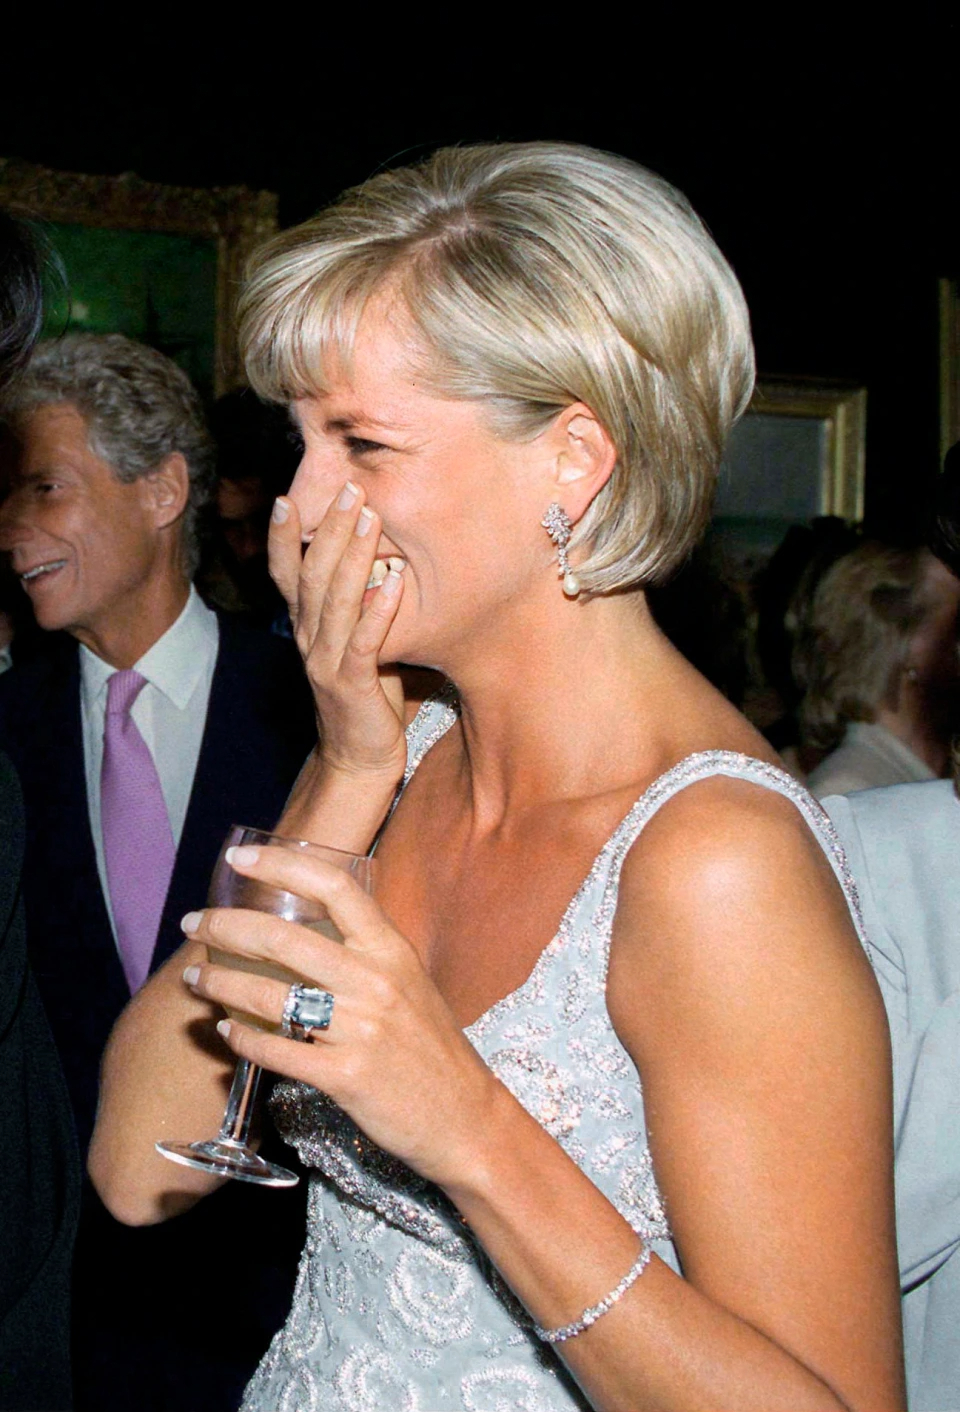 Diana at event